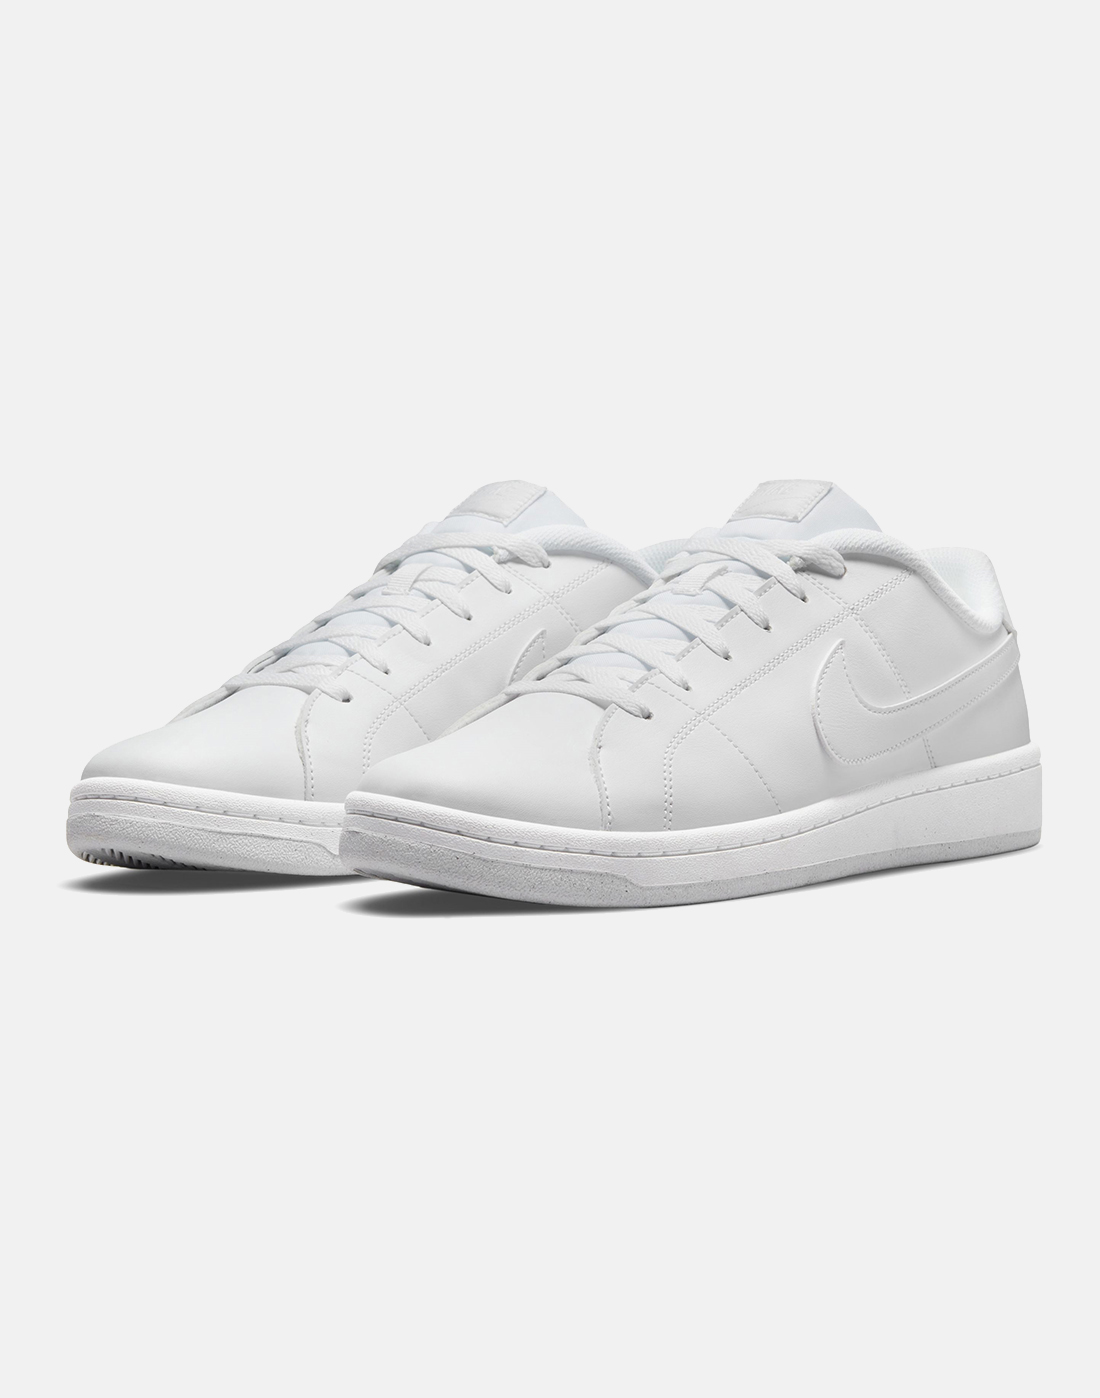 media By law Catastrophe Nike Mens Court Royale 2 - White | Life Style Sports IE